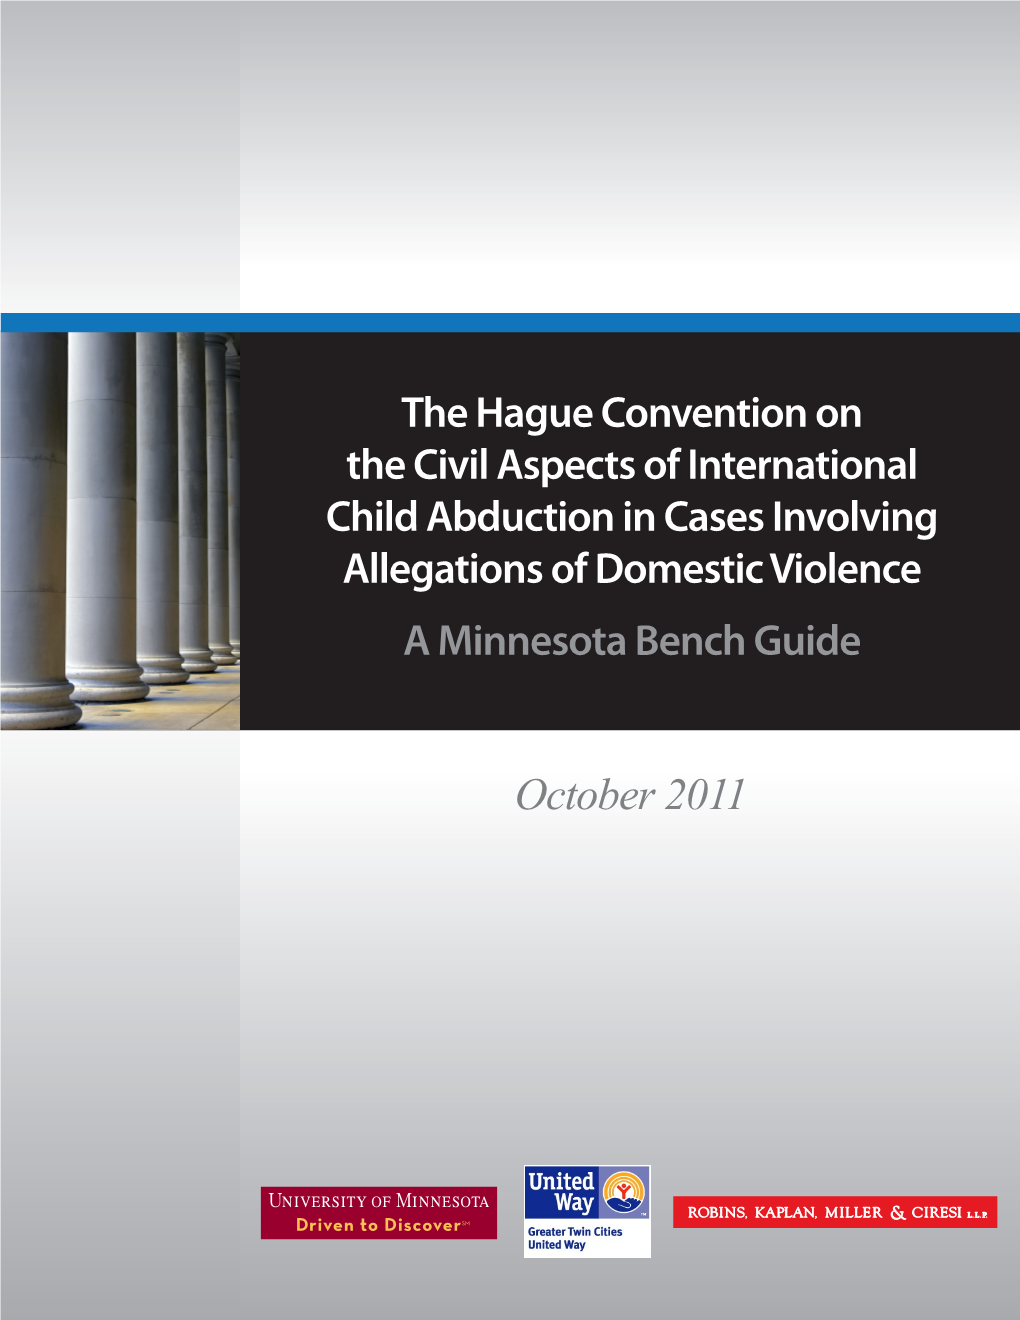 The Hague Convention on the Civil Aspects of International Child Abduction in Cases Involving Allegations of Domestic Violence a Minnesota Bench Guide